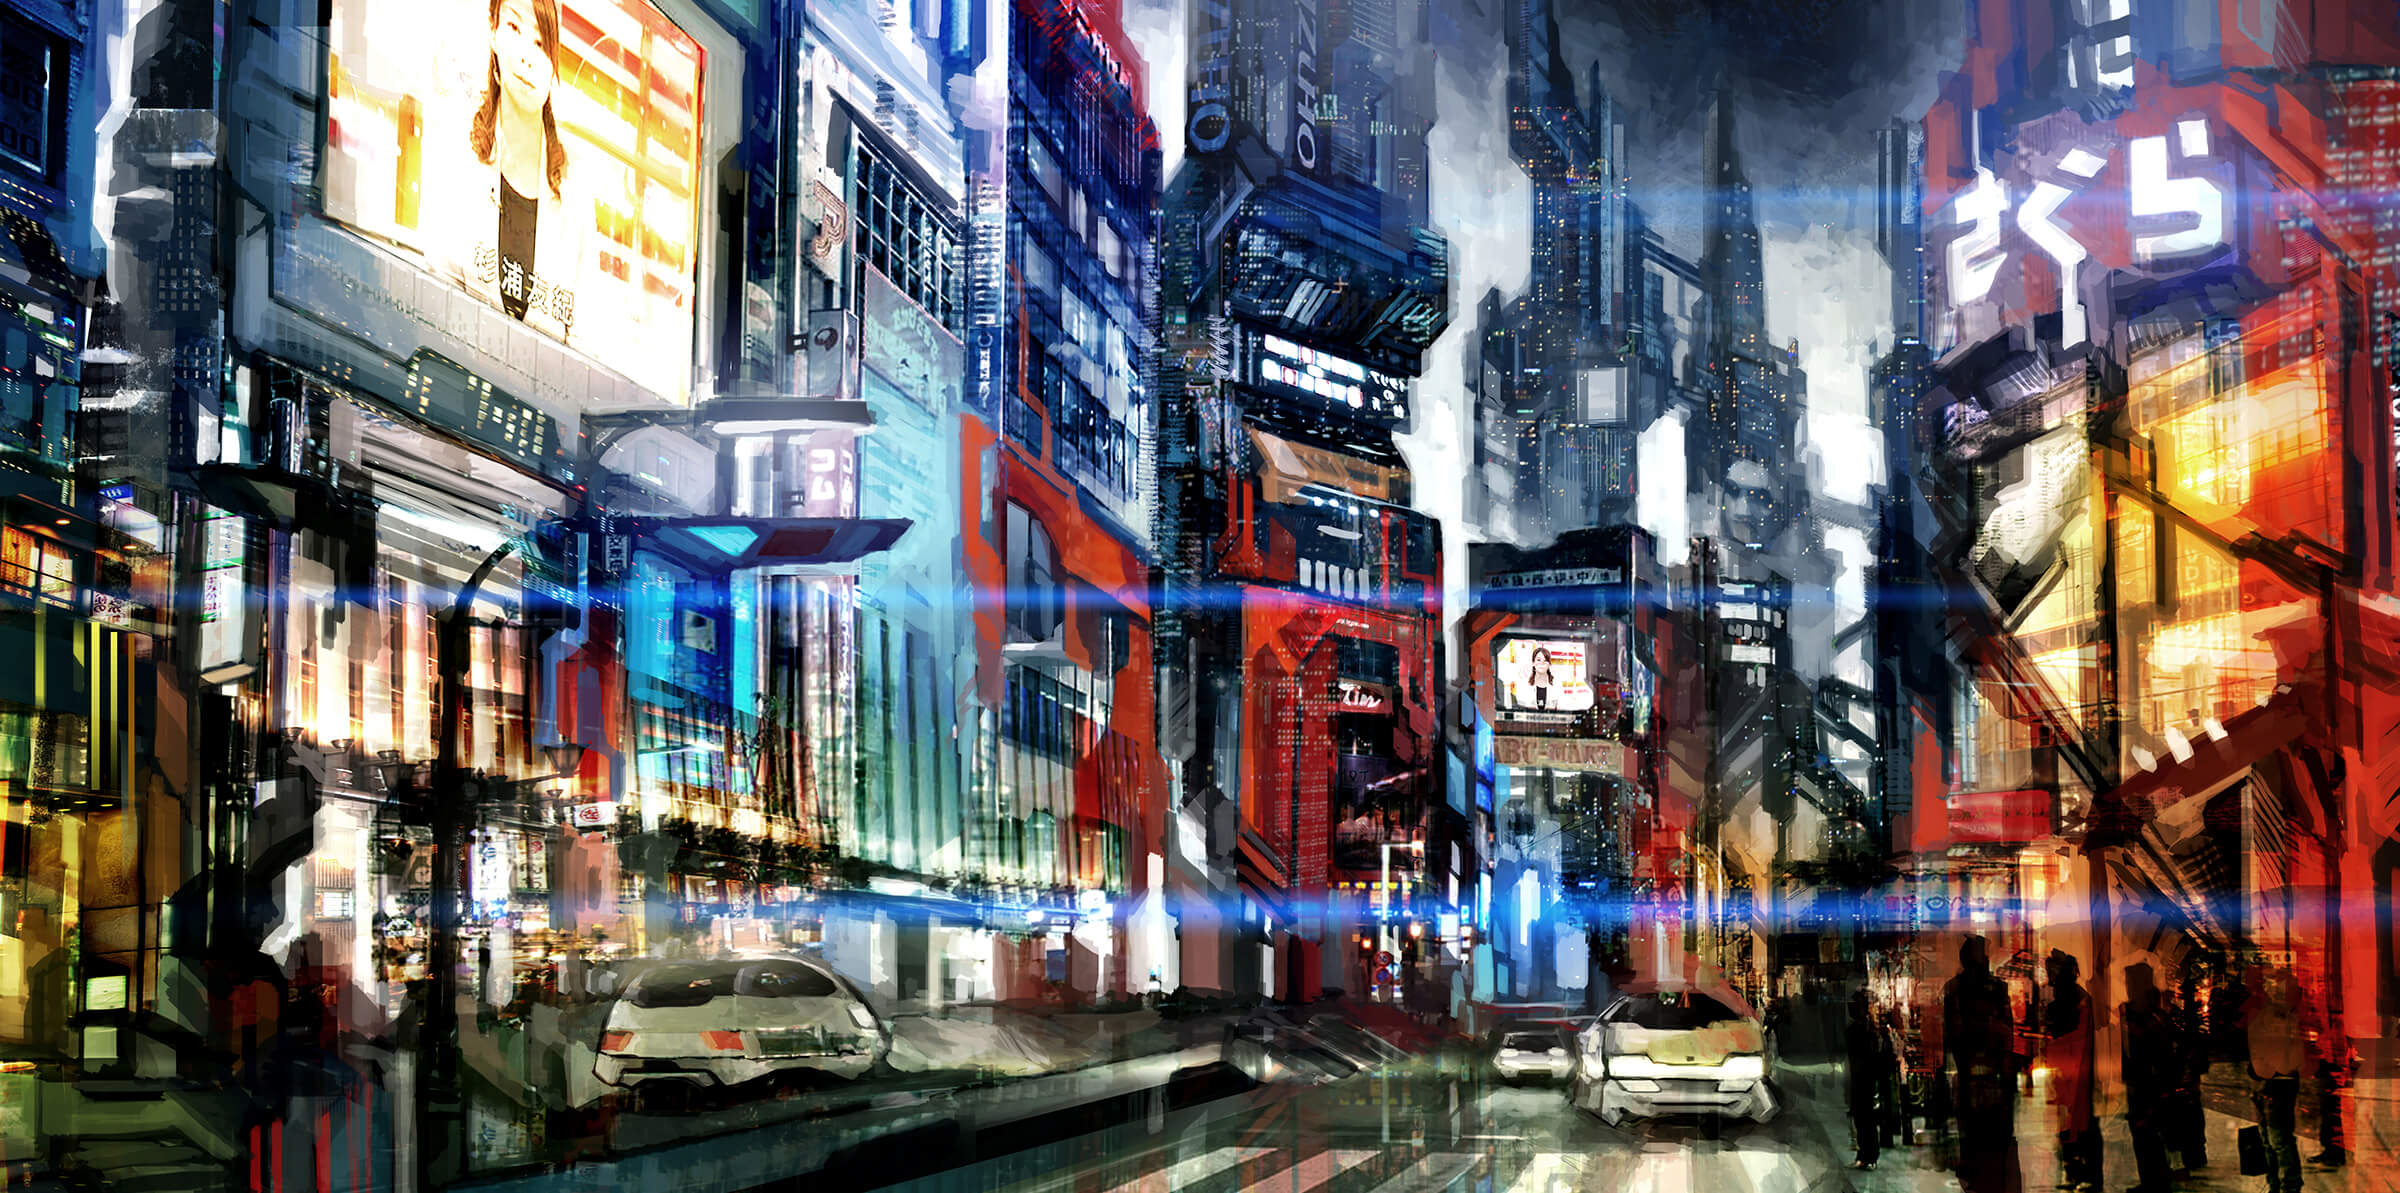 A cyberpunk-style city street at night, flanked by brightly lit skyscrapers adorned with projected images and video.